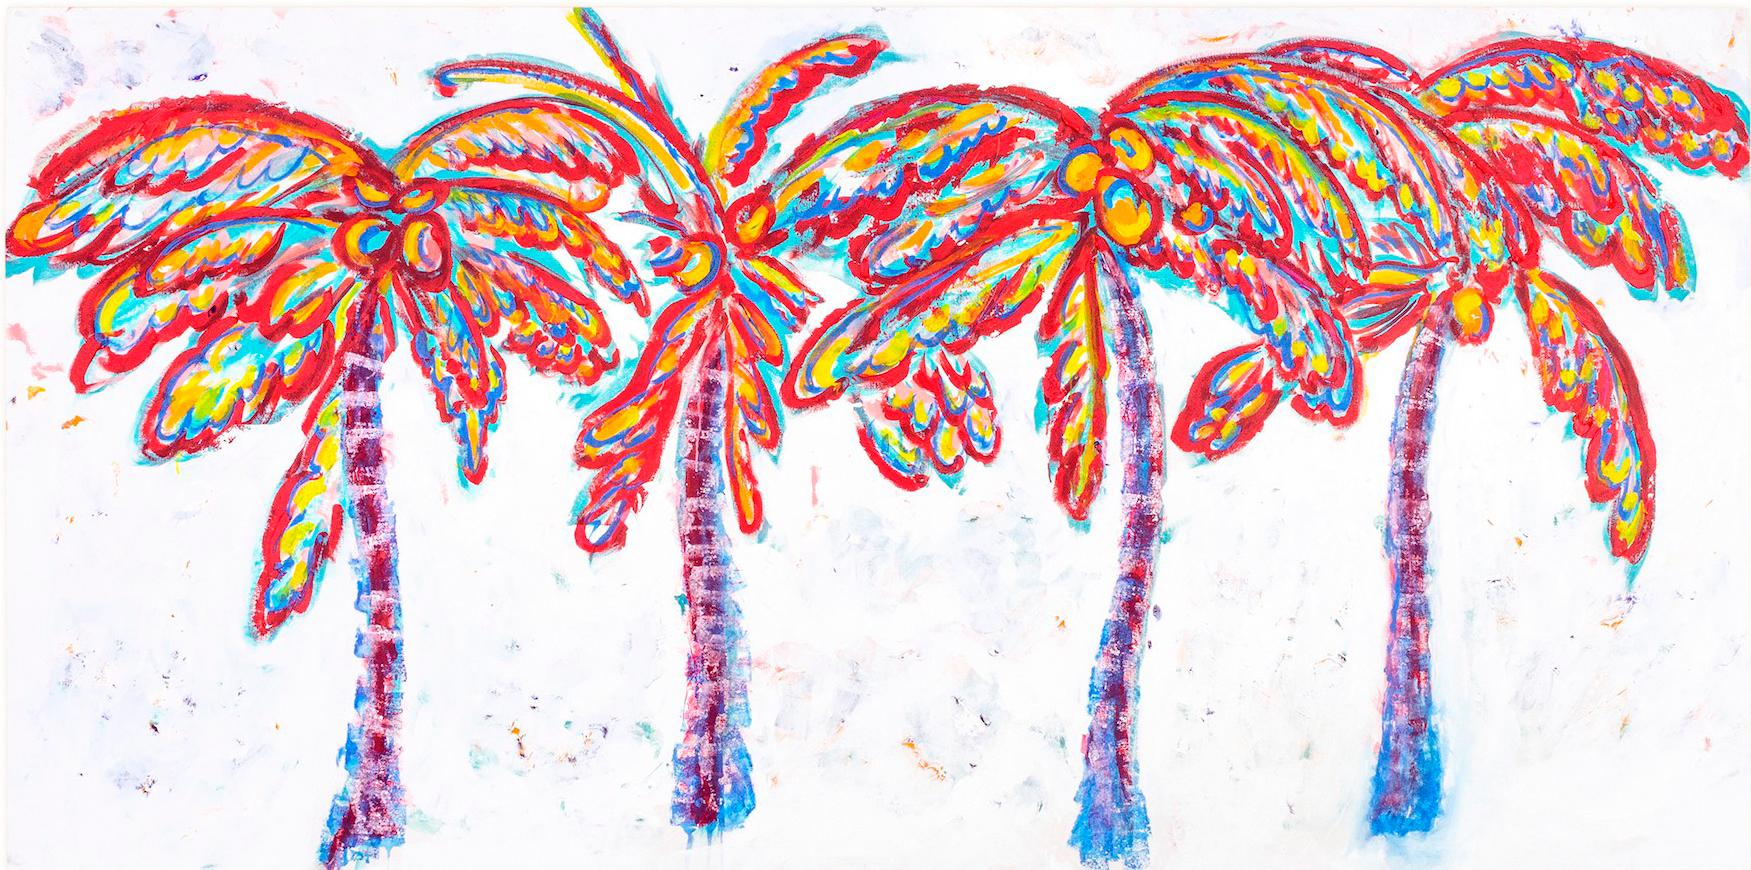 Camilla Webster Landscape Painting - "Dancing Palms" Figurative Painting, Acrylic on Canvas